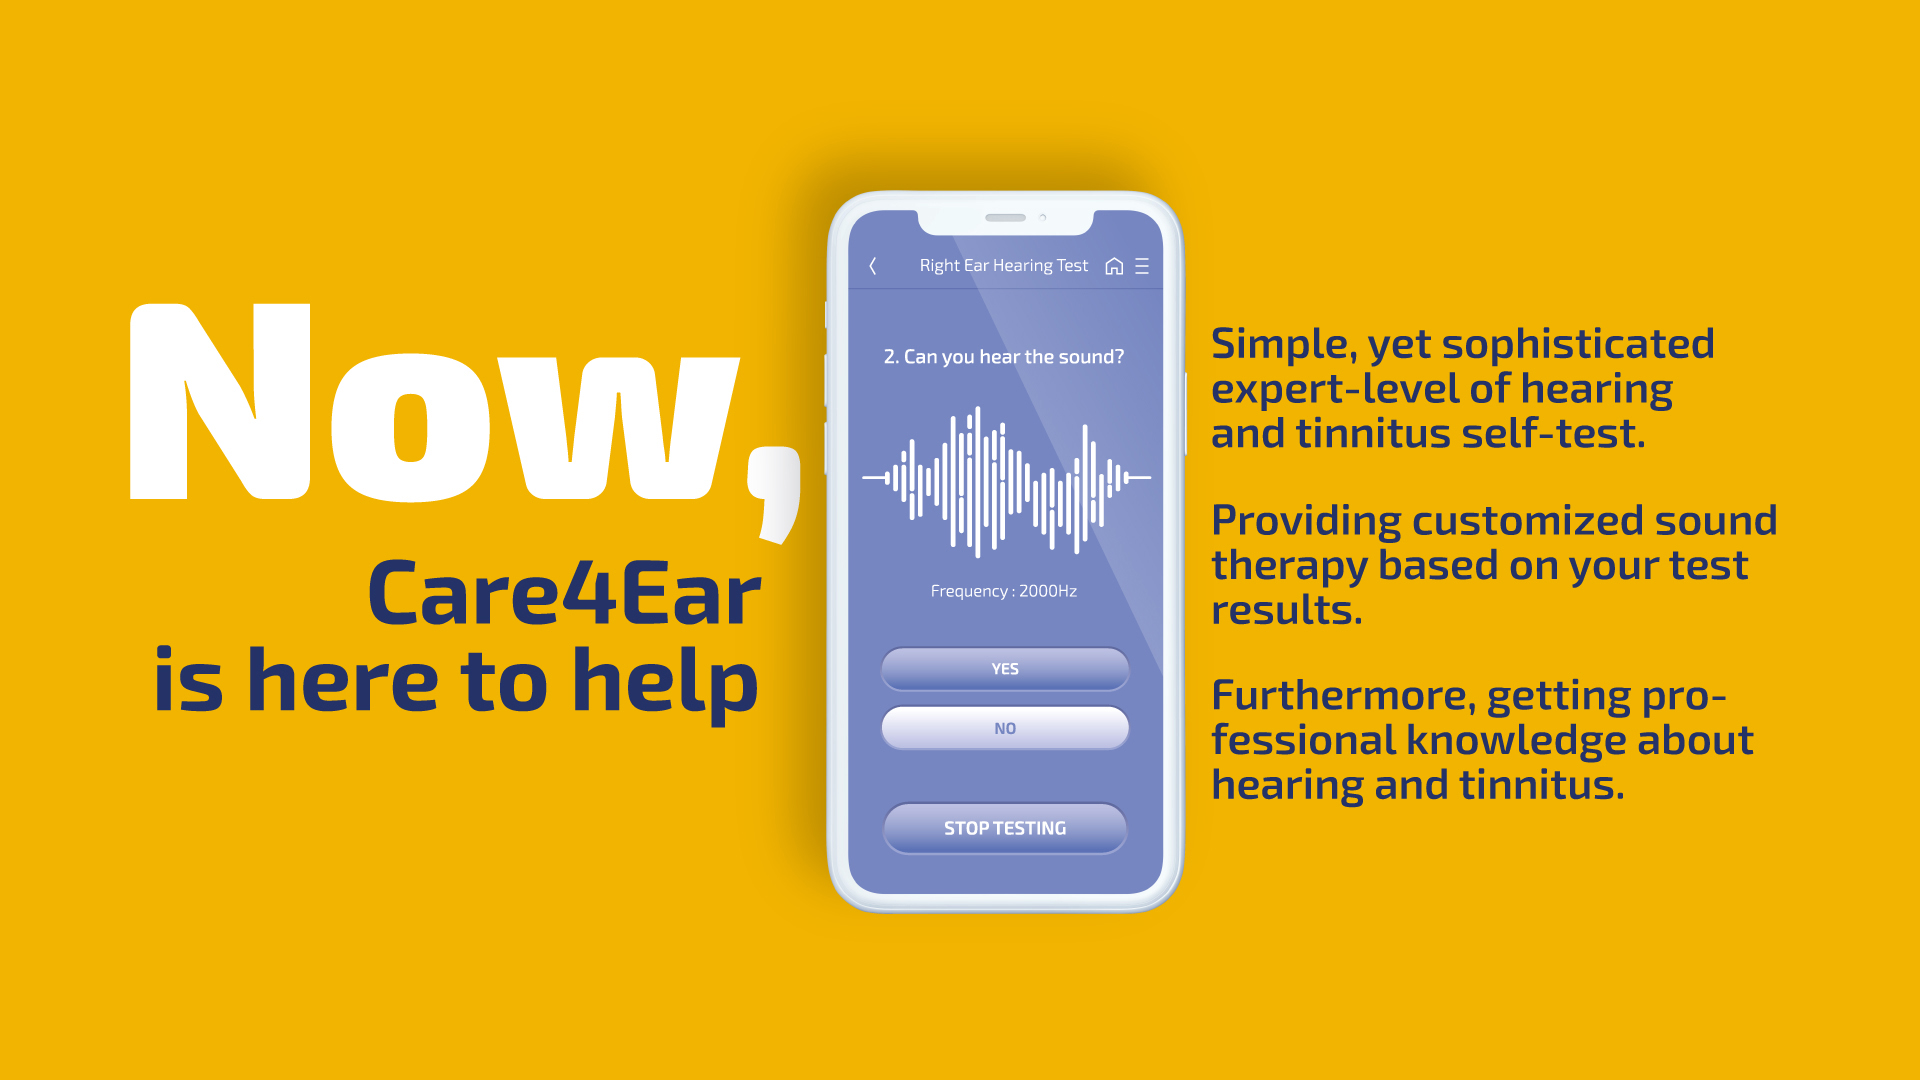 If you suspect yourself you may have tinnitus, care your ear with CARE4EAR